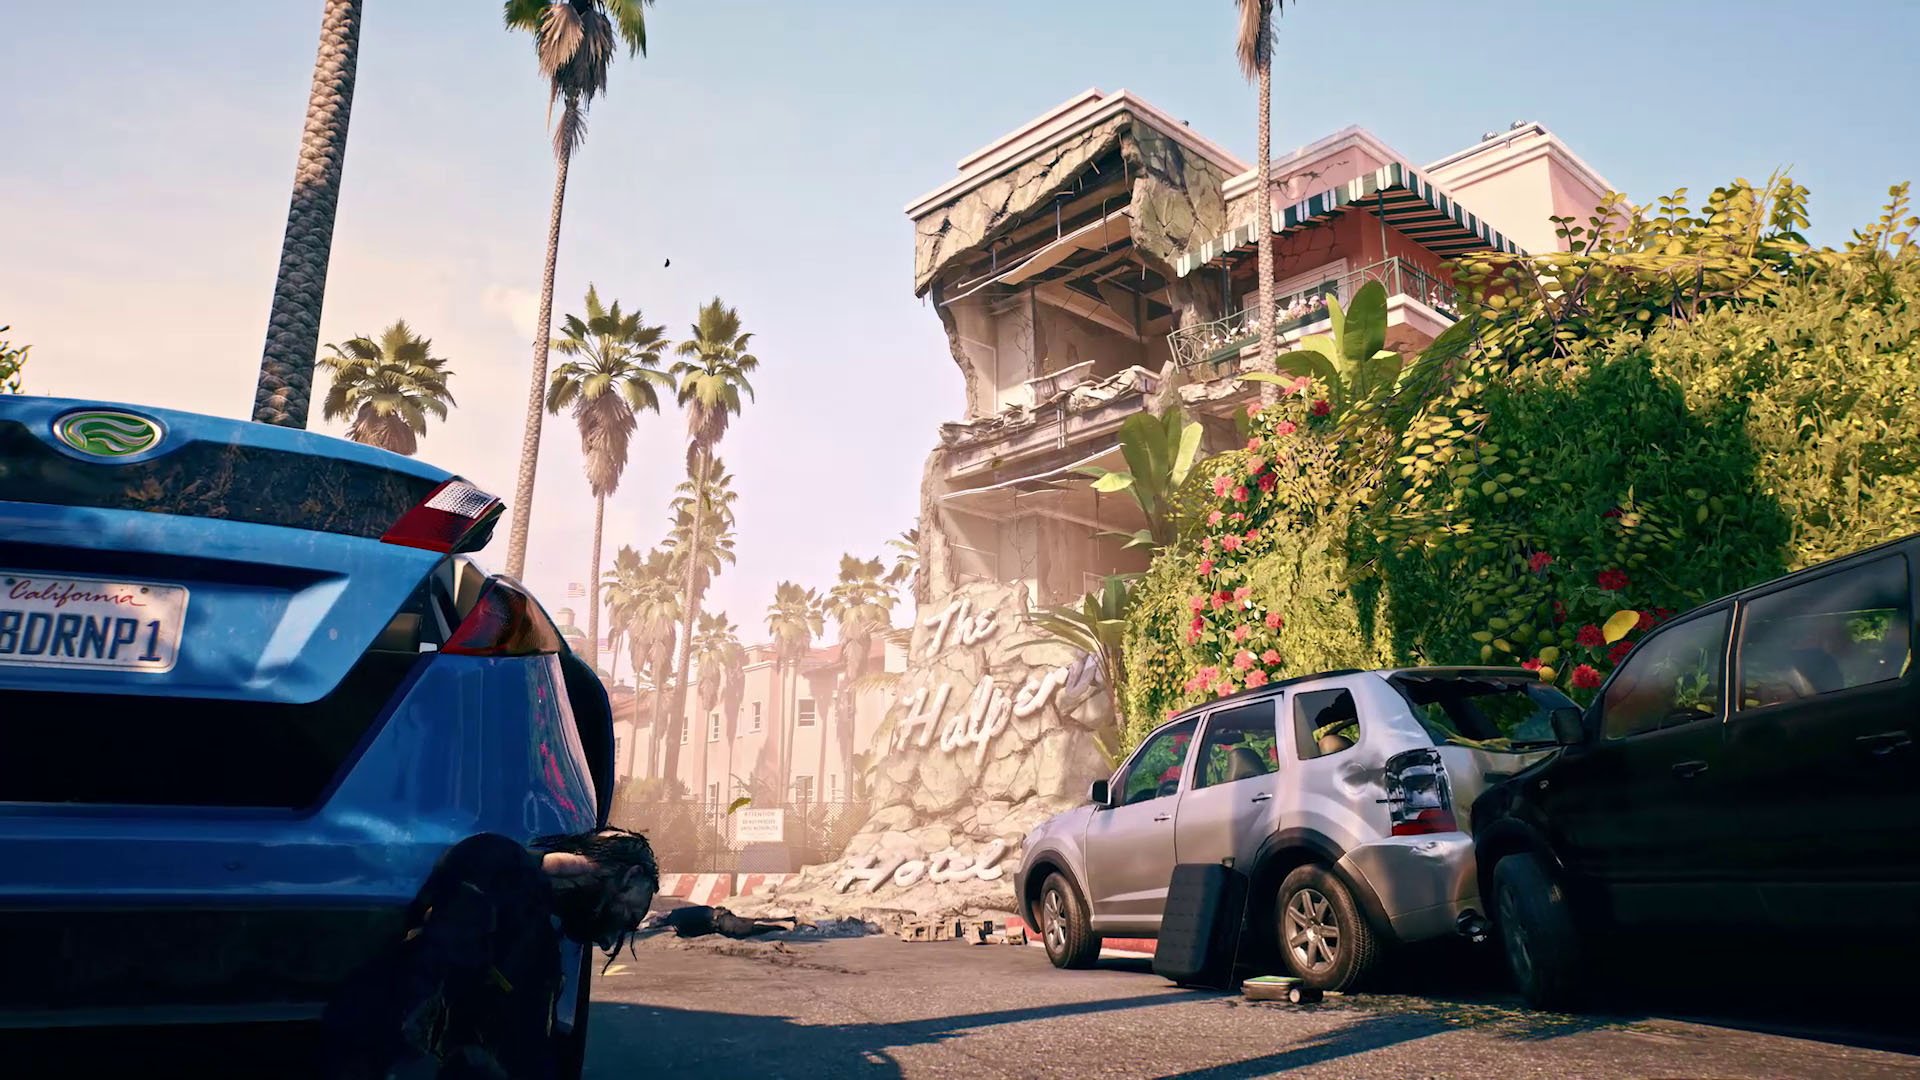 Dead Island 2 - Extended Gameplay Reveal Trailer